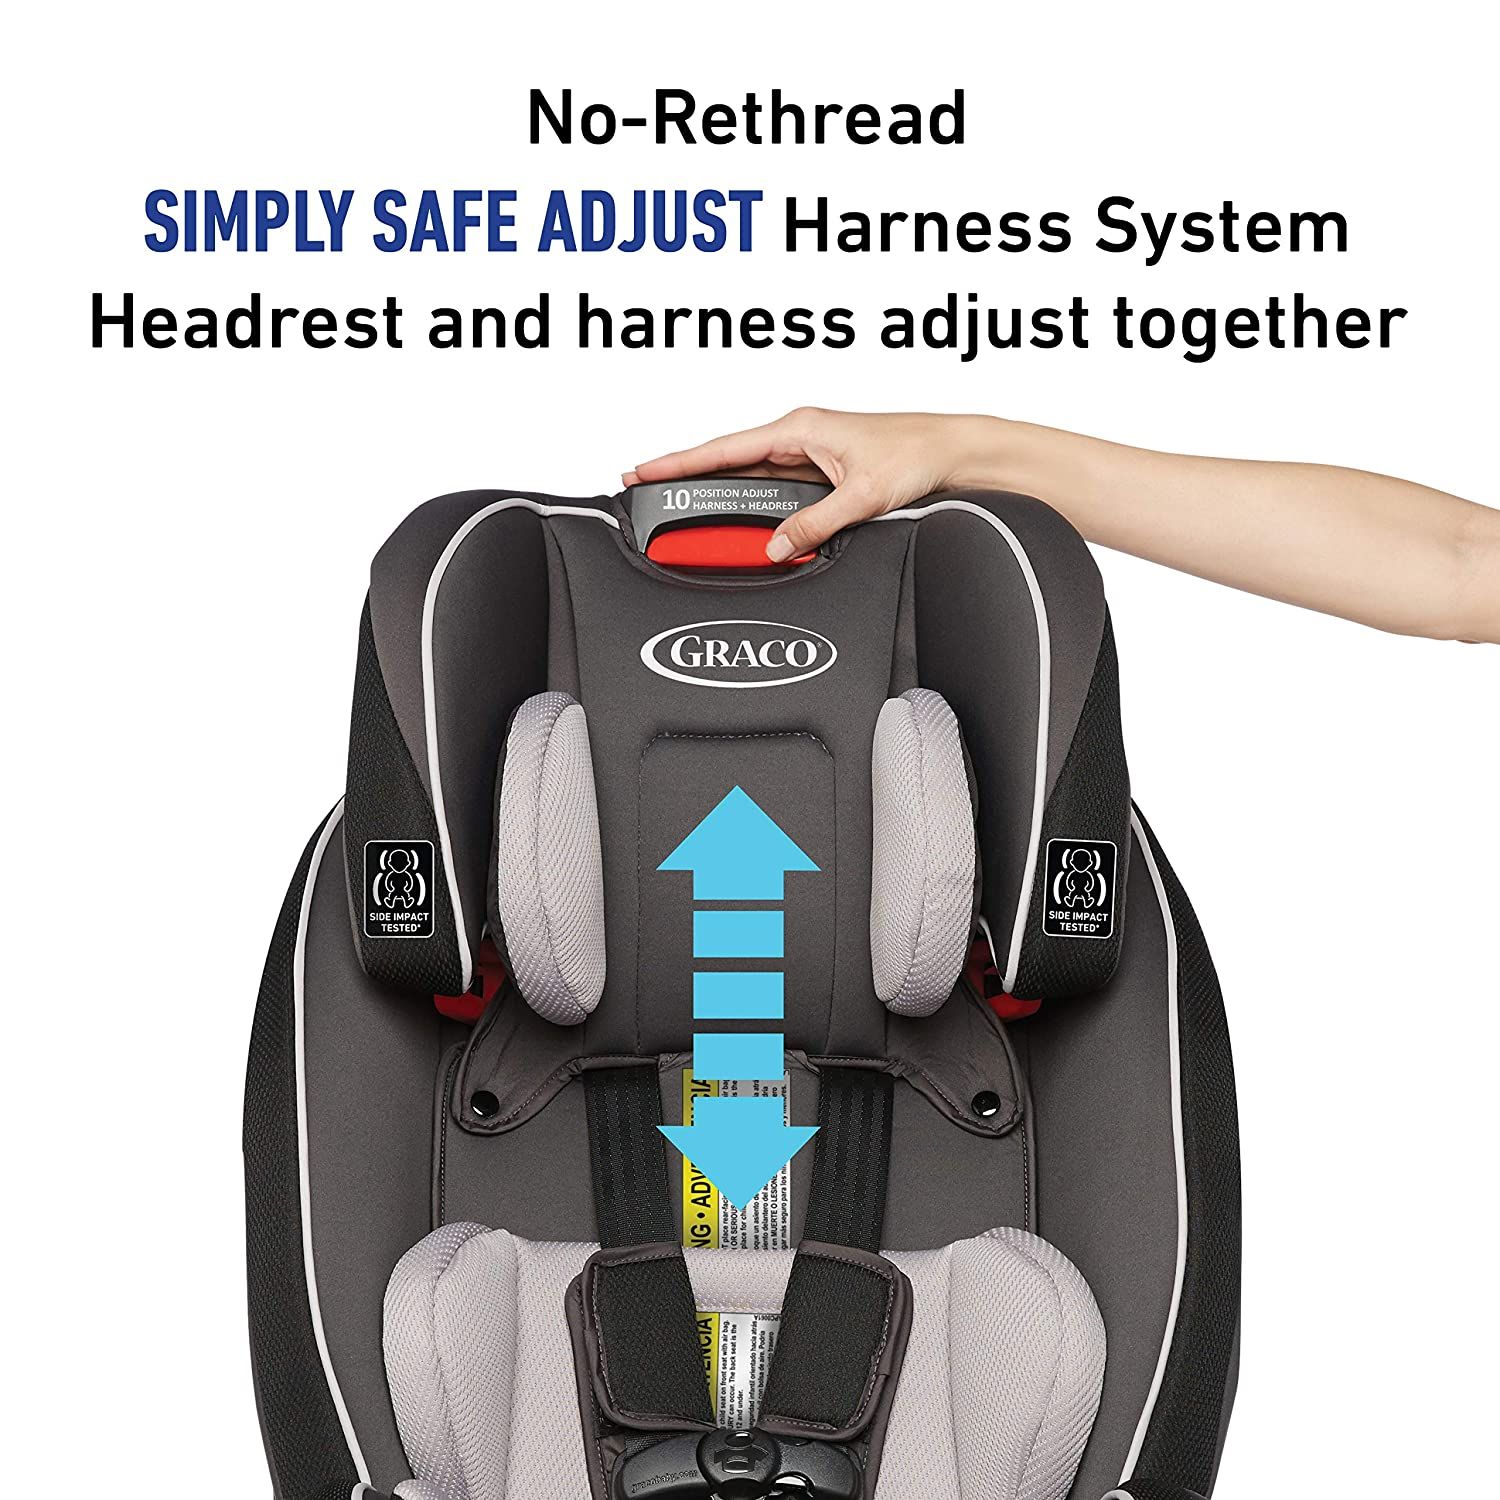 Amazon.com : Graco SlimFit 3 in 1 Car Seat -Slim & Comfy Design Saves Space in Your Back Seat, Da... | Amazon (US)